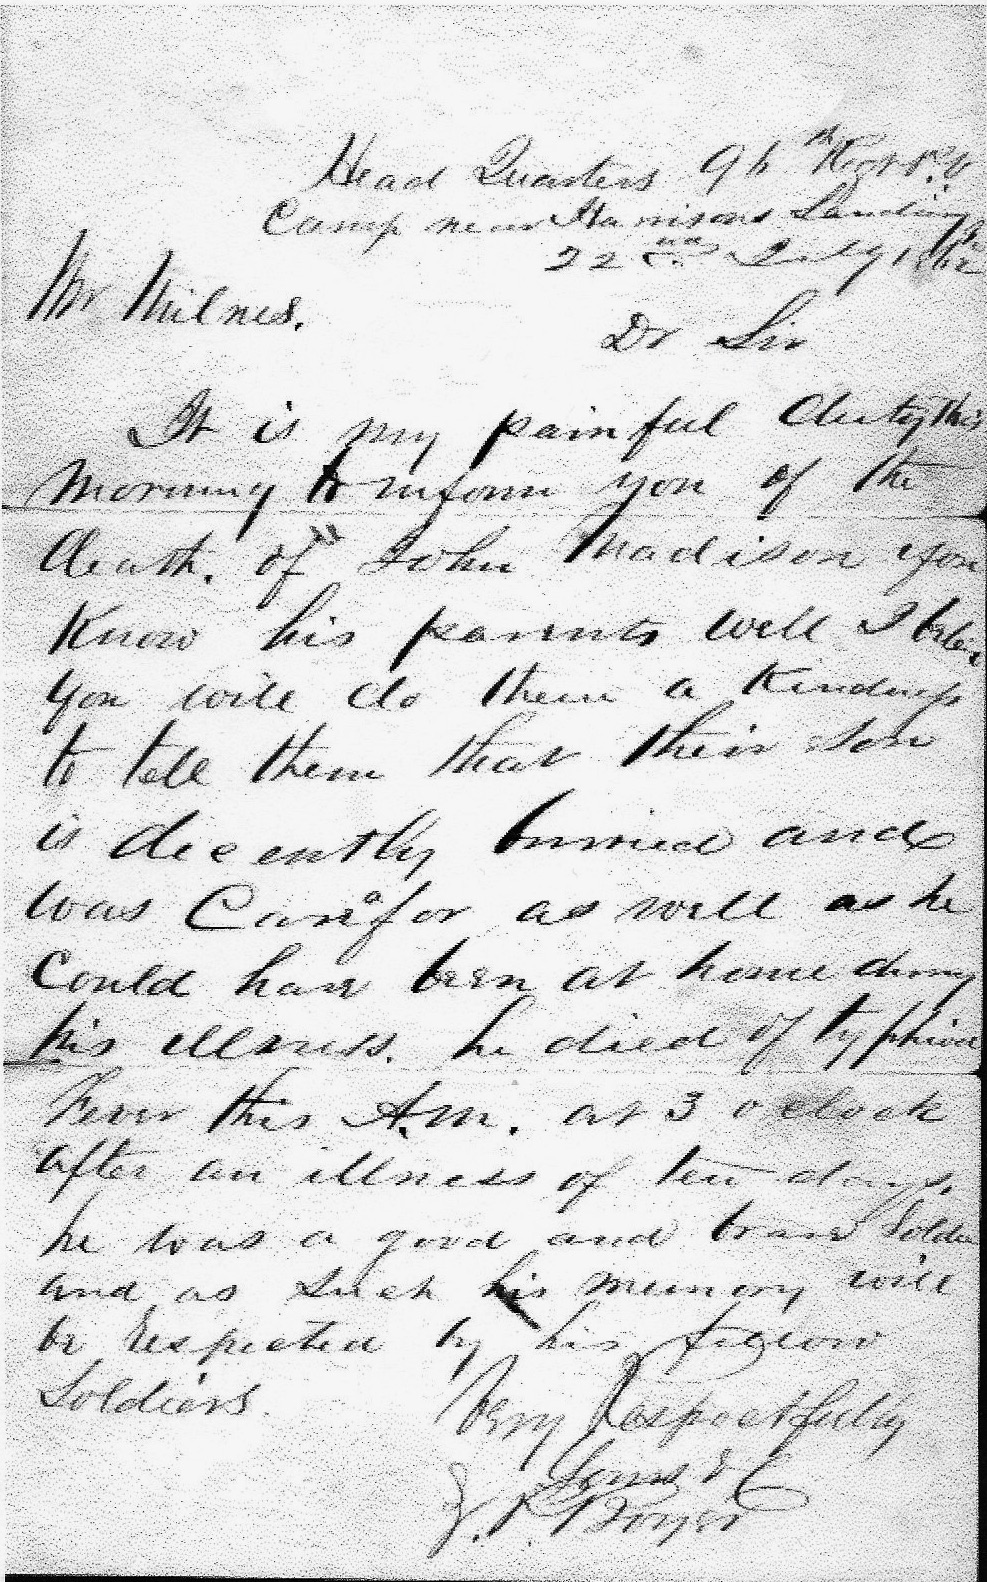 Letter about John Madison's passing